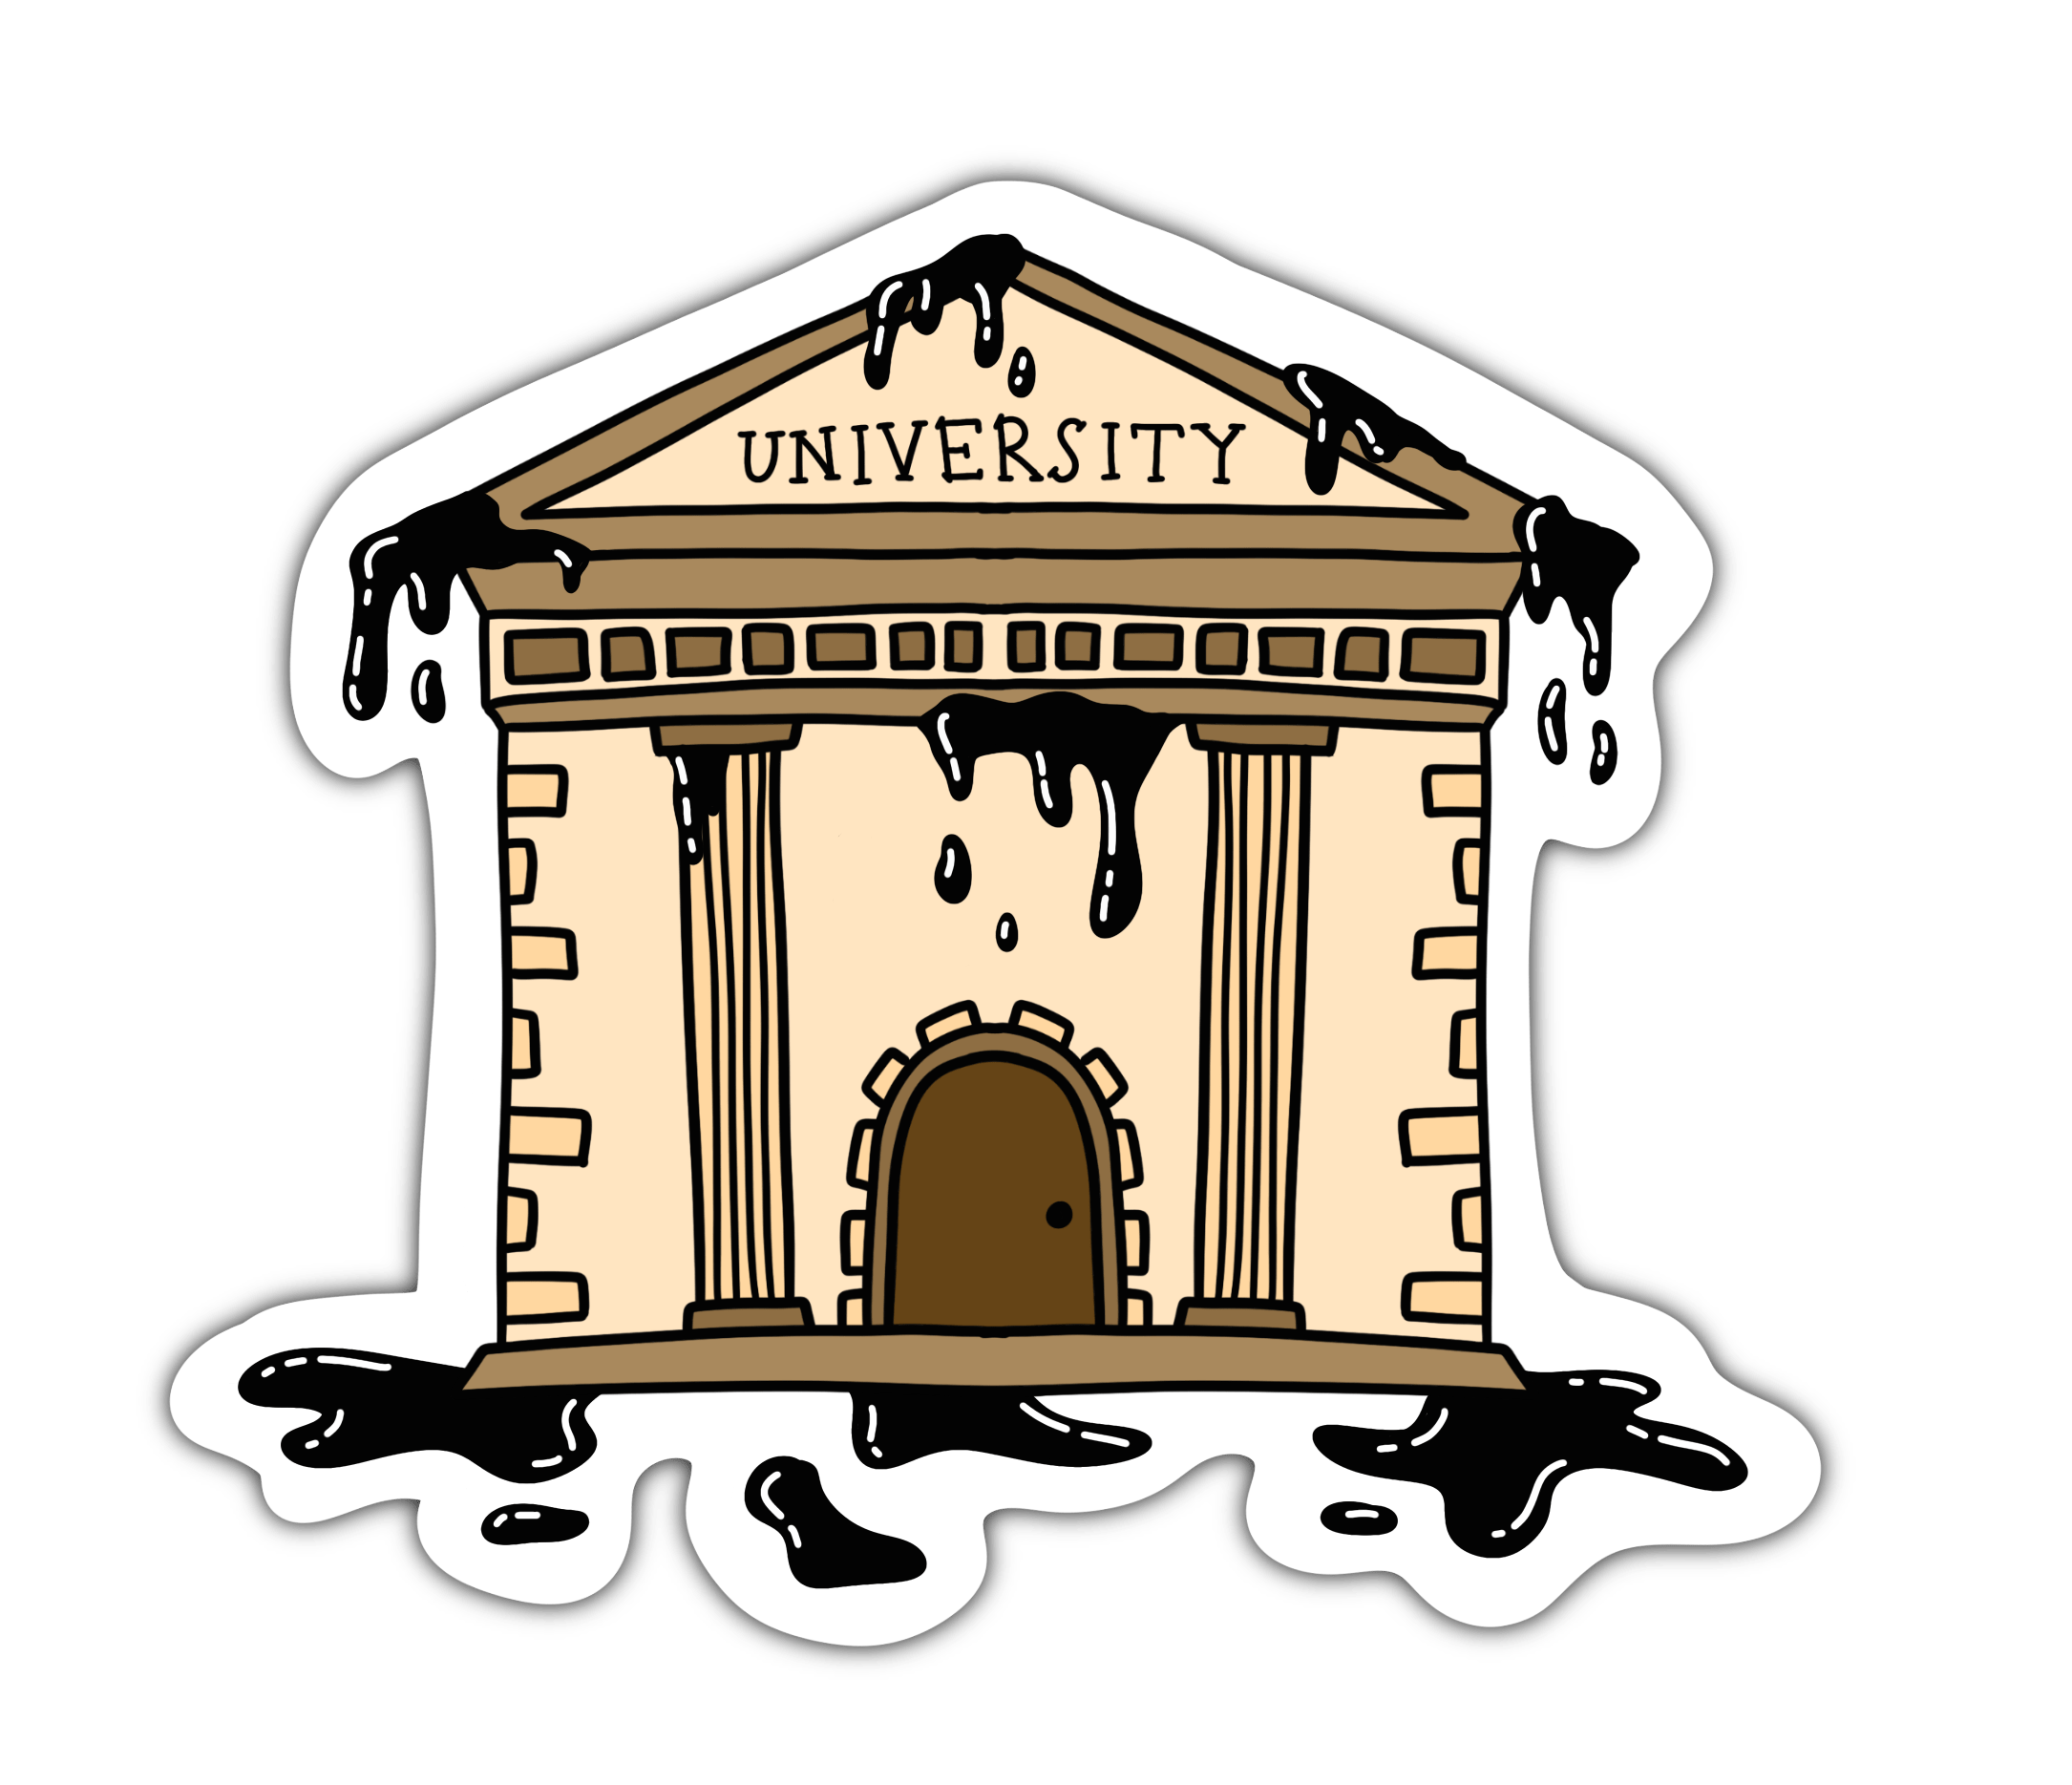 University dripping with oil